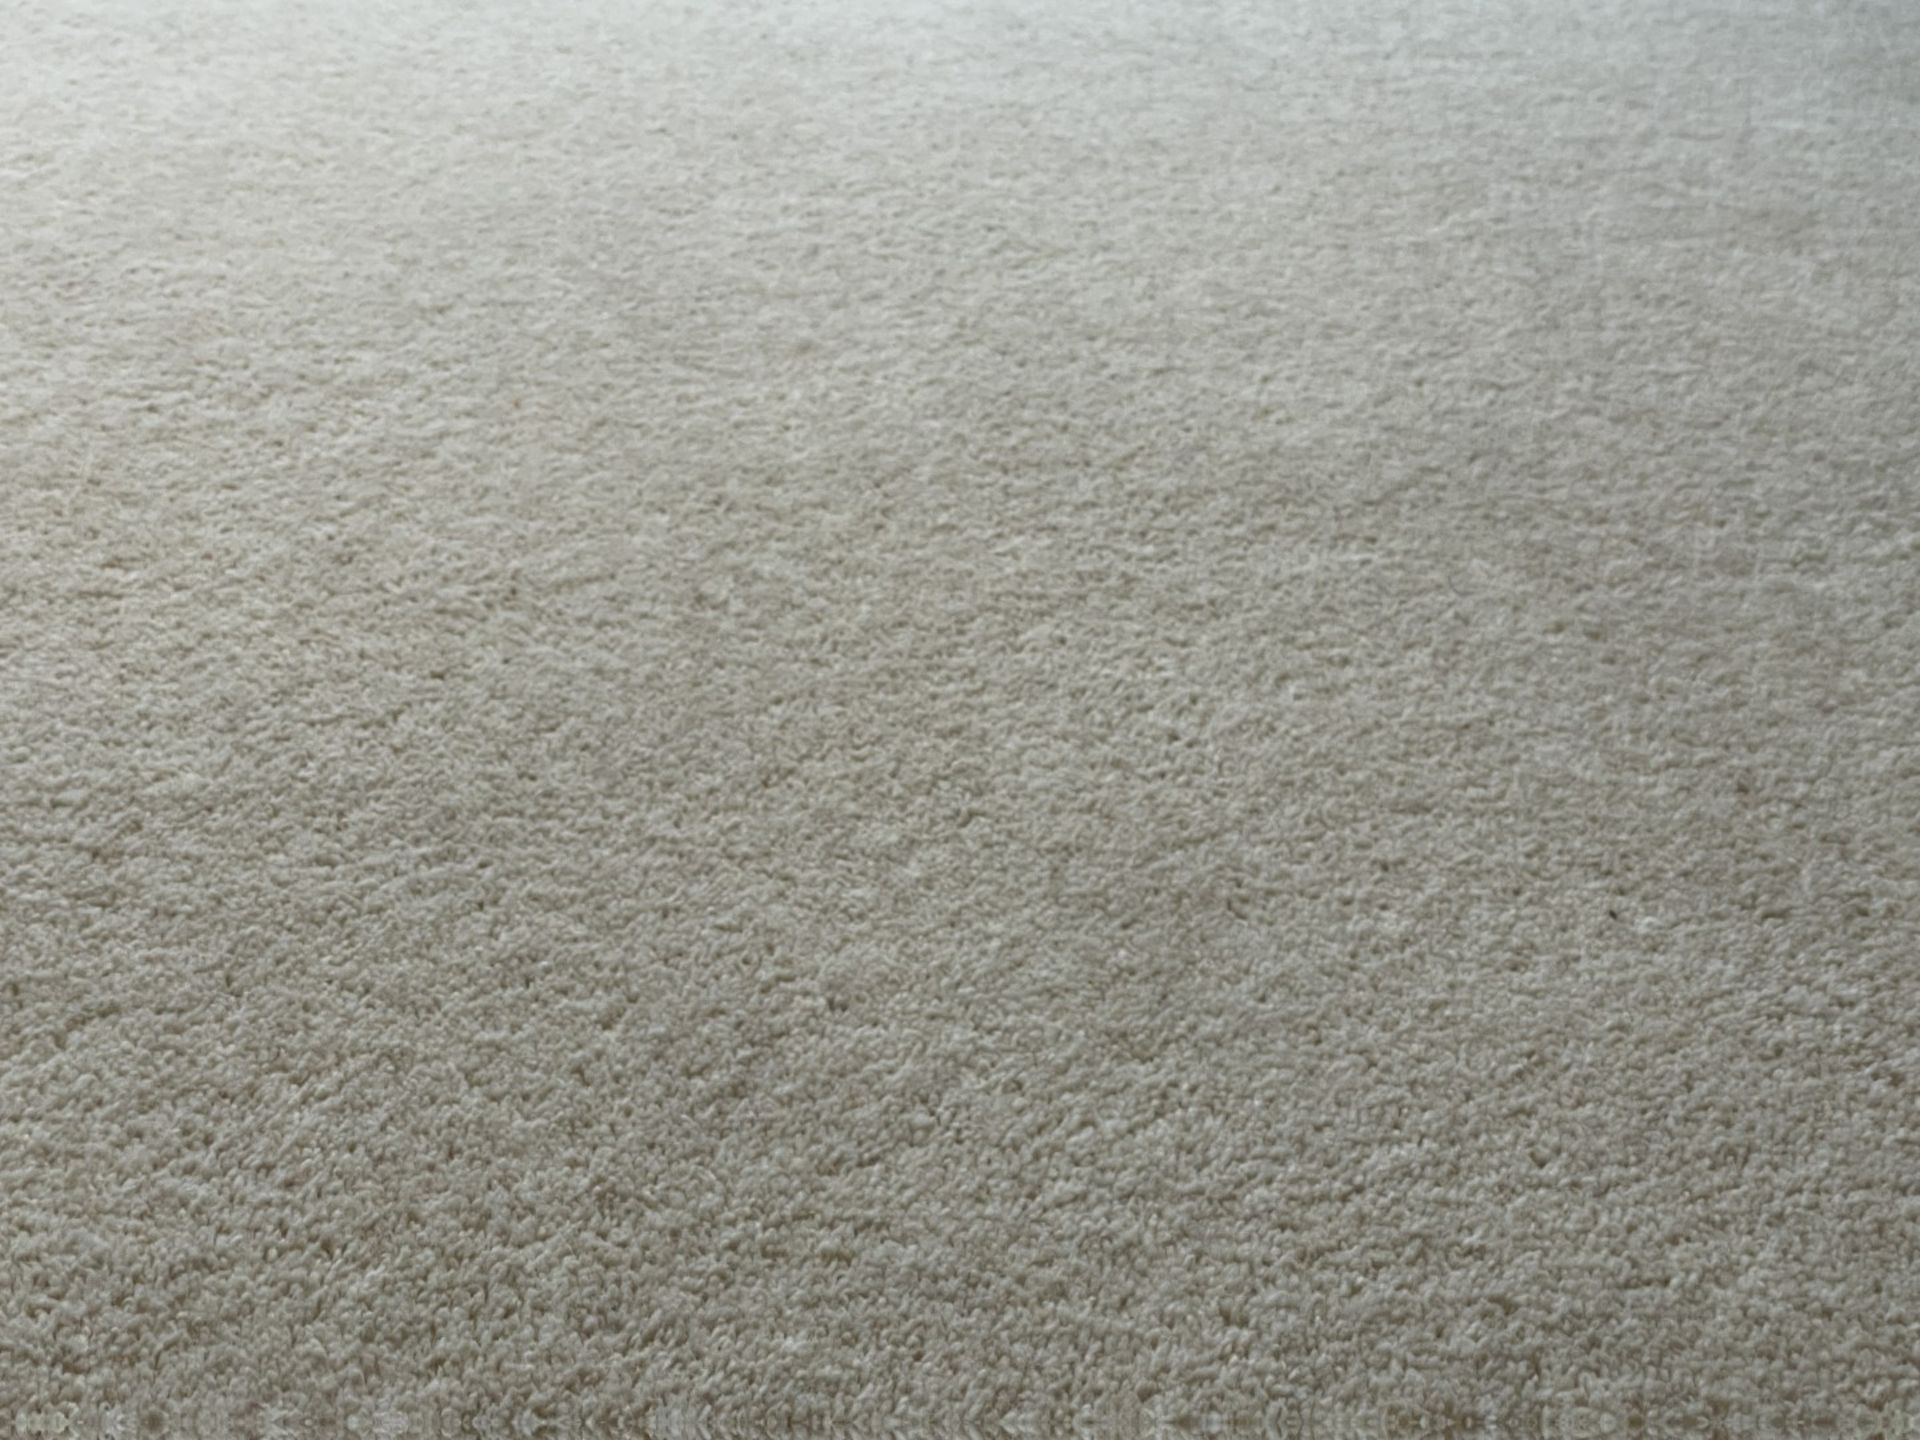 1 x Luxury Wool Back Bedroom Carpet in a Neutral Tone with Premium Underlay - Image 7 of 16